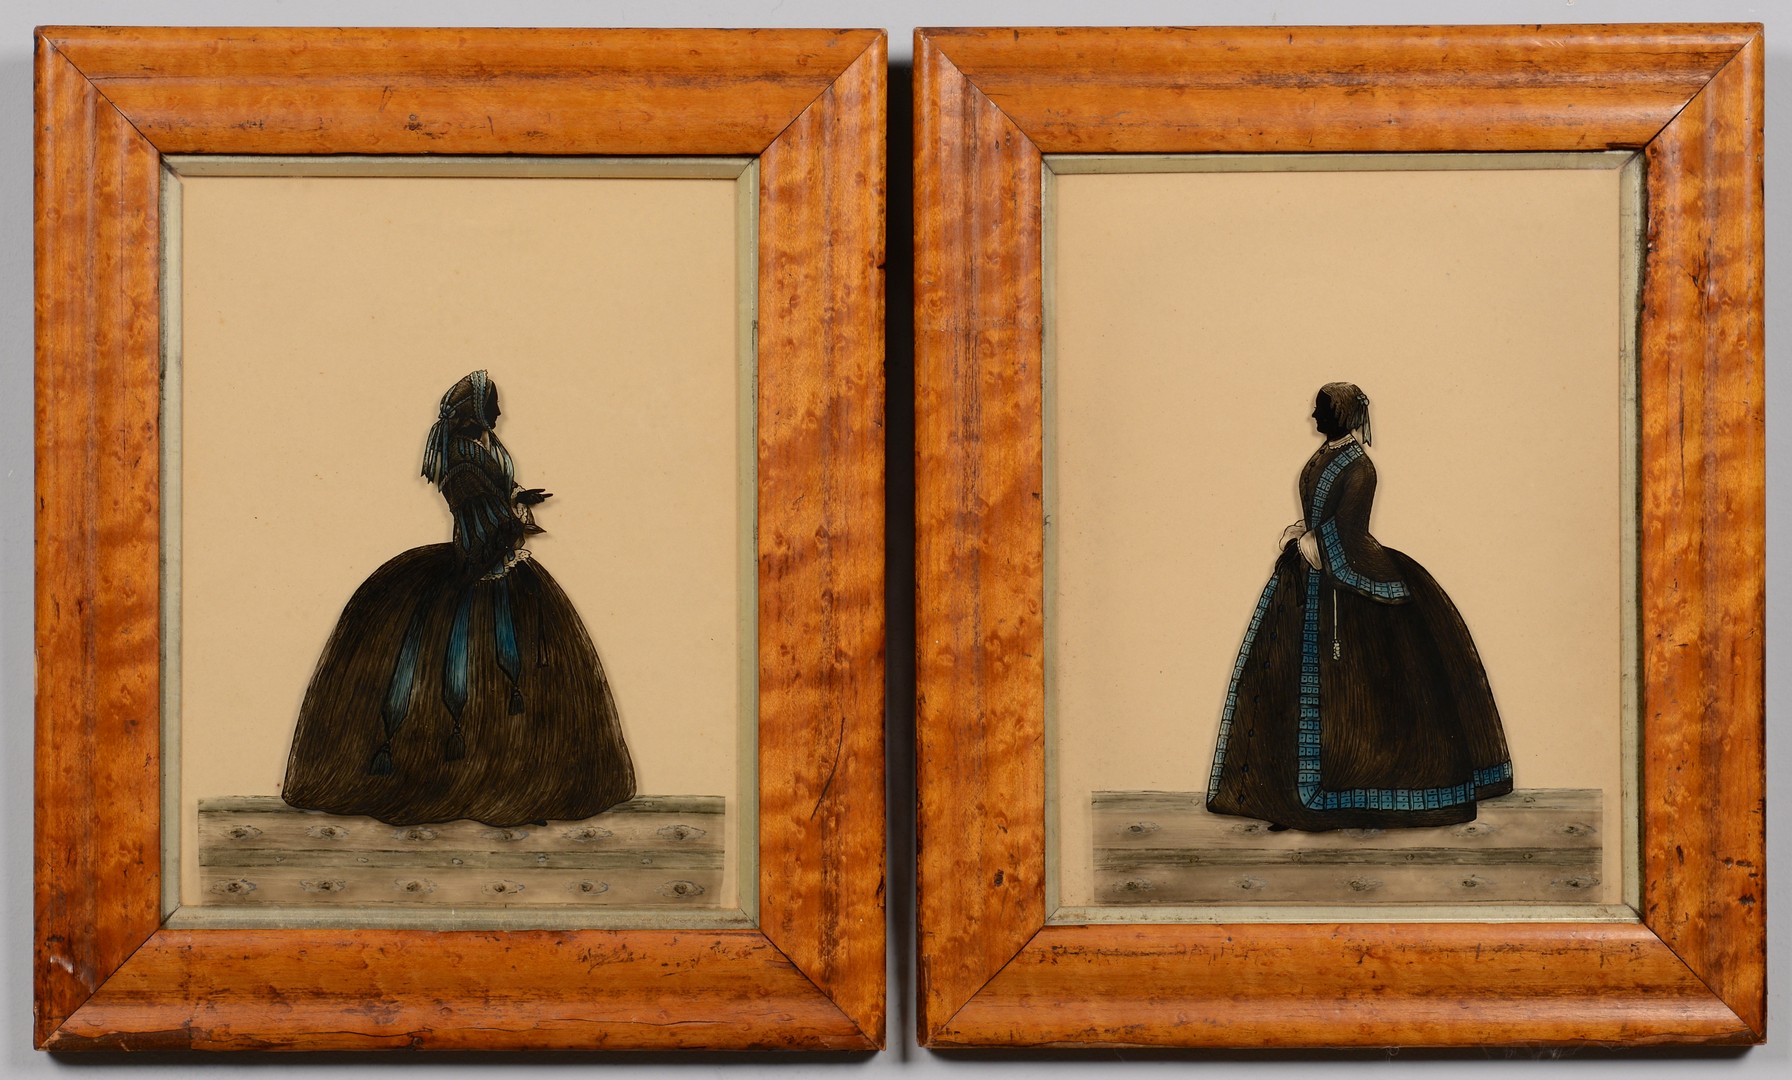 Lot 531: 2 Reverse Silhouette Paintings on Glass